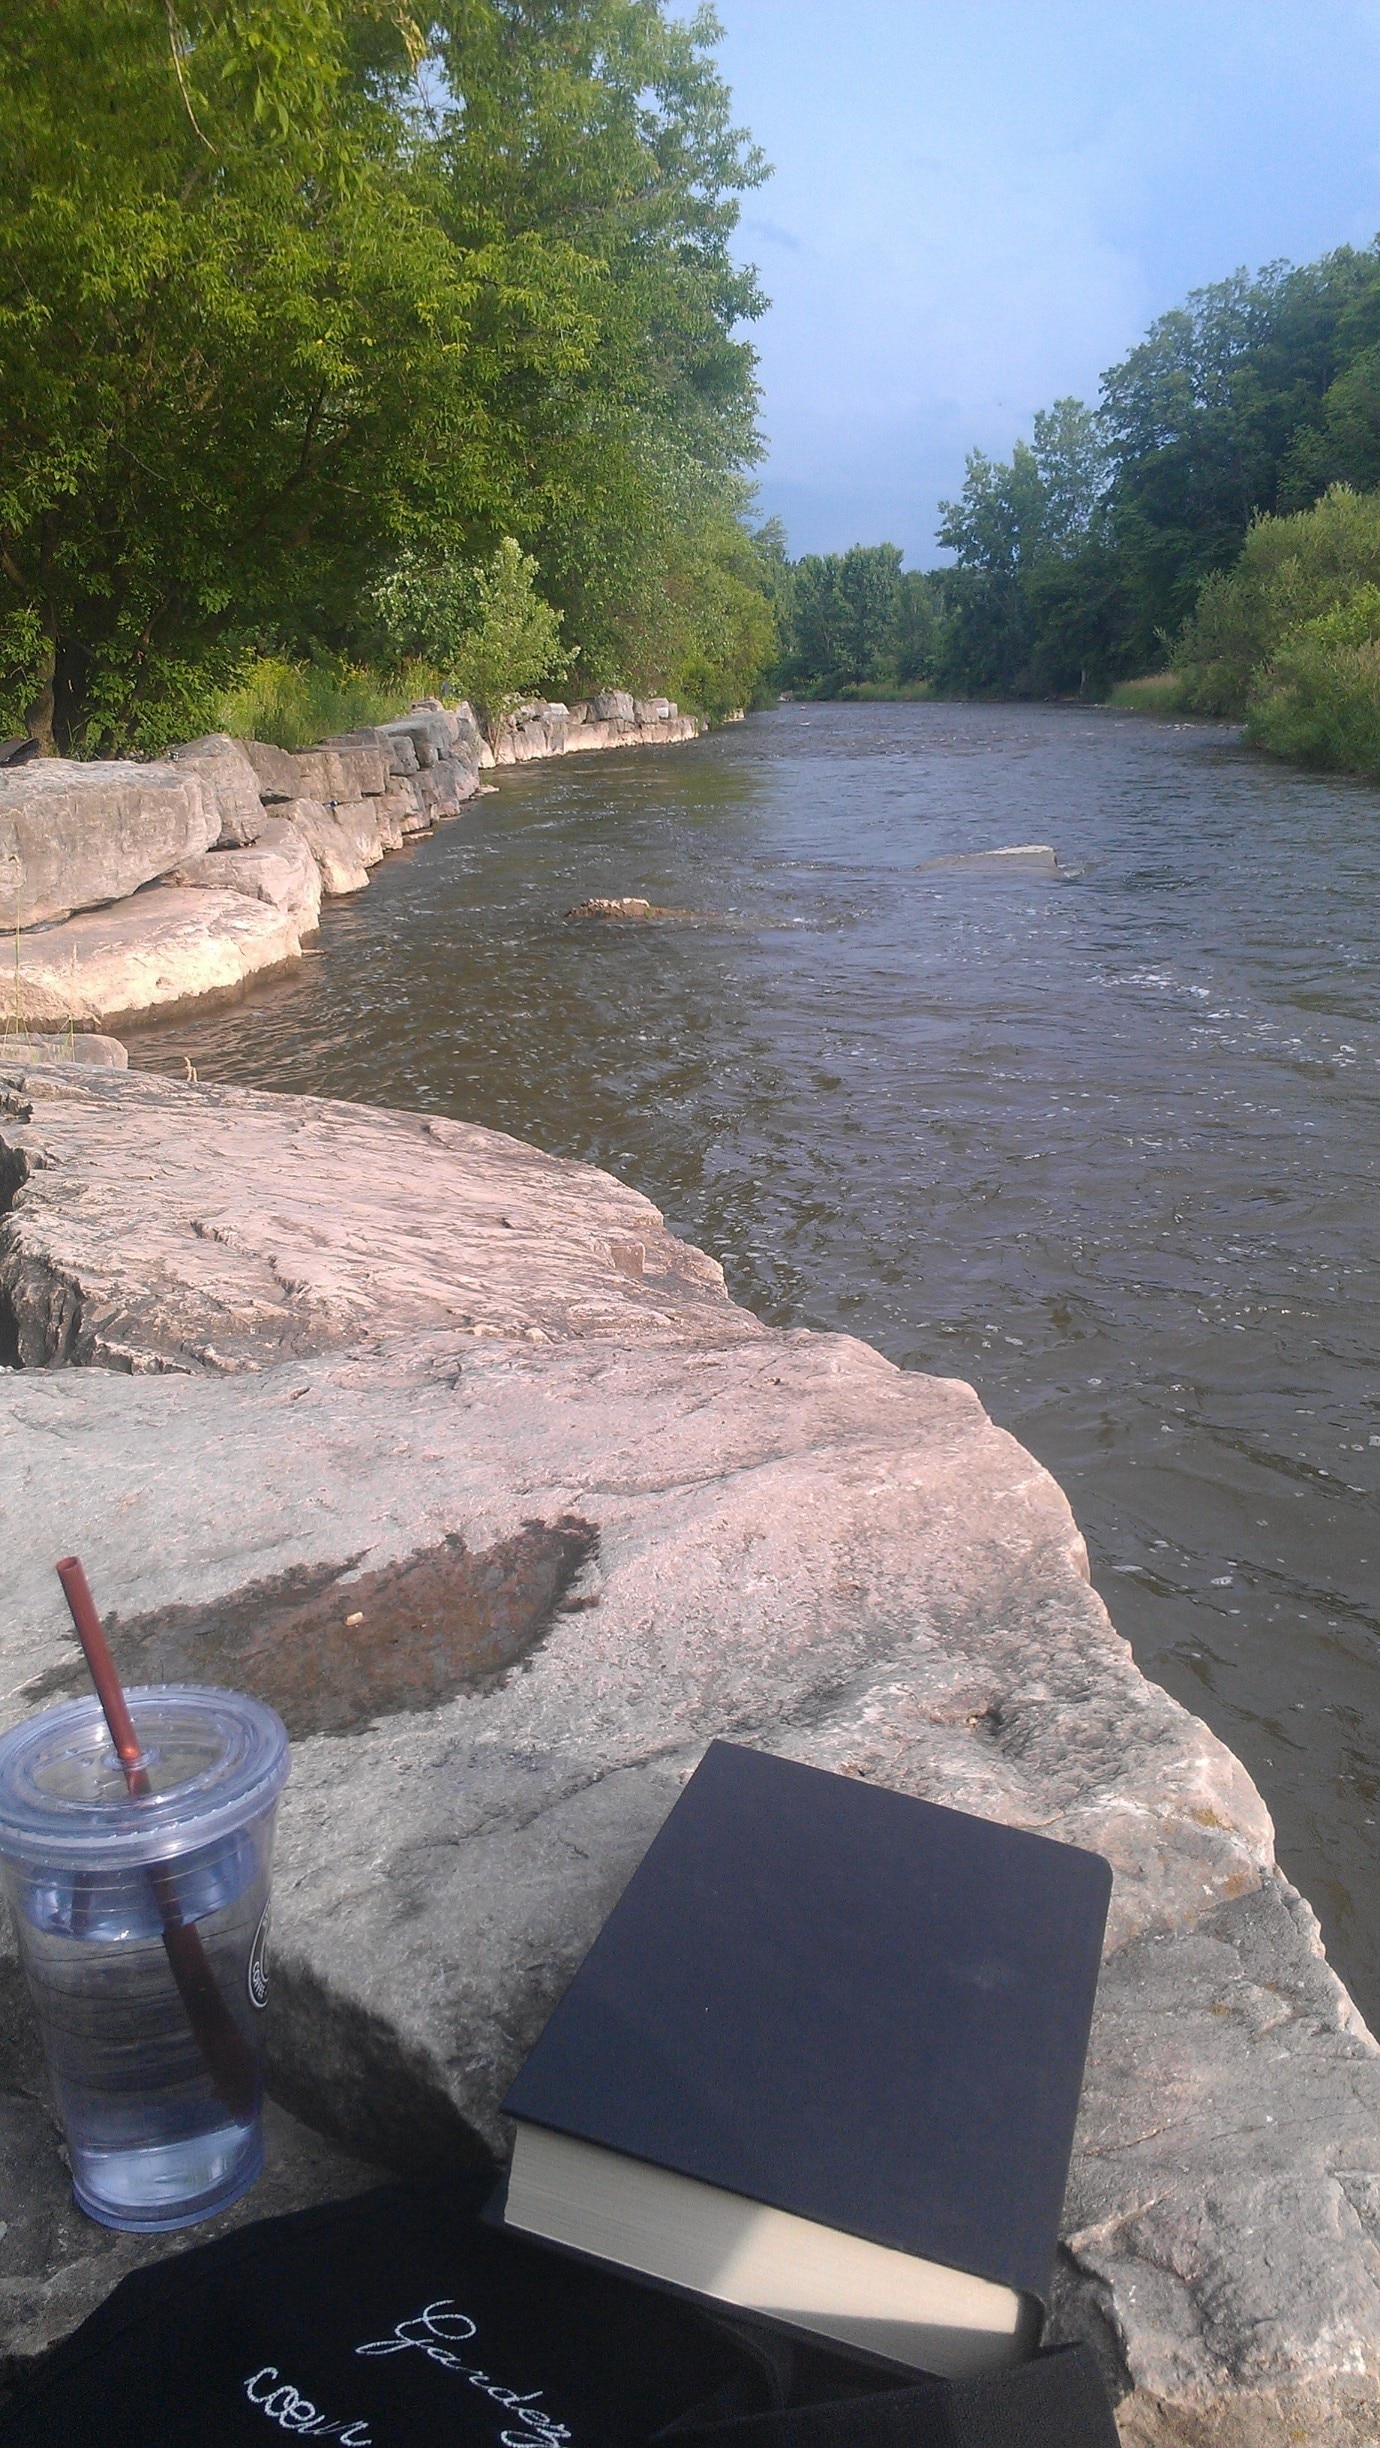 I read a book while my uncle, cousin, and bro fished for our dinner that night. The view was gorg.